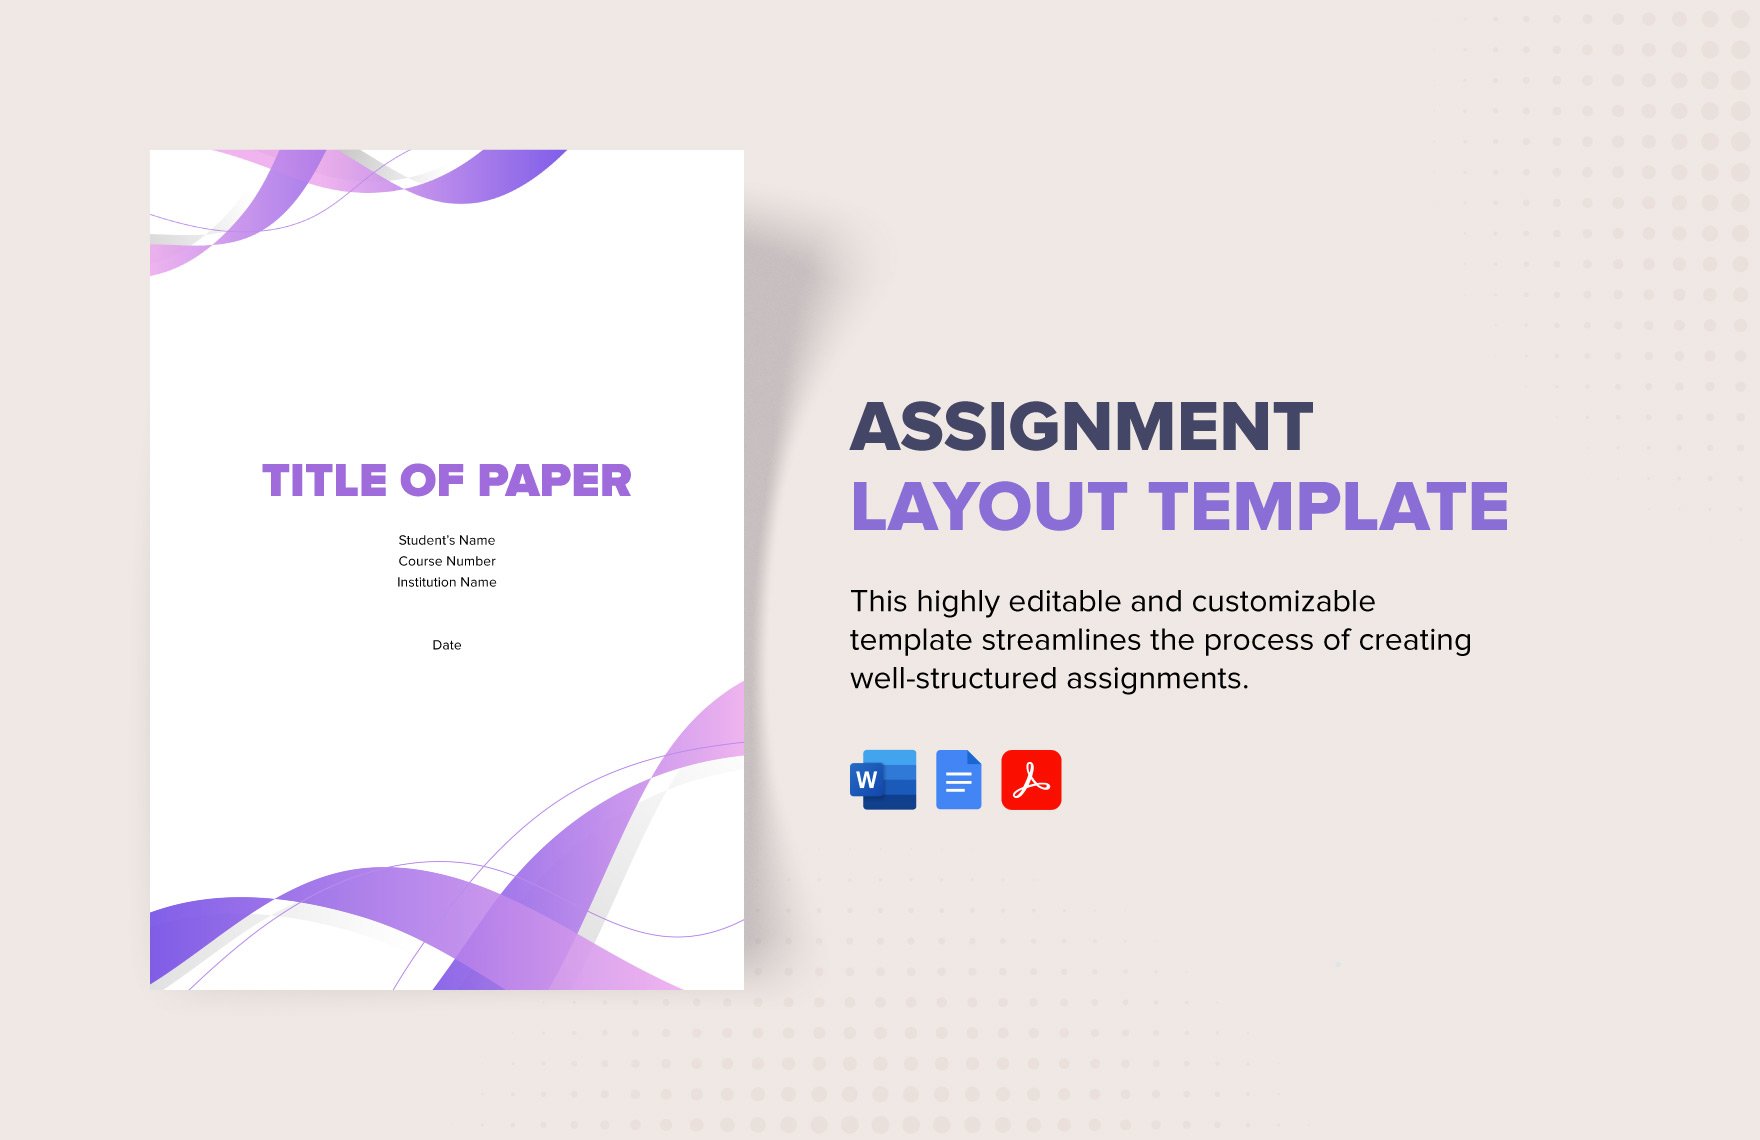 Assignment Layout Template